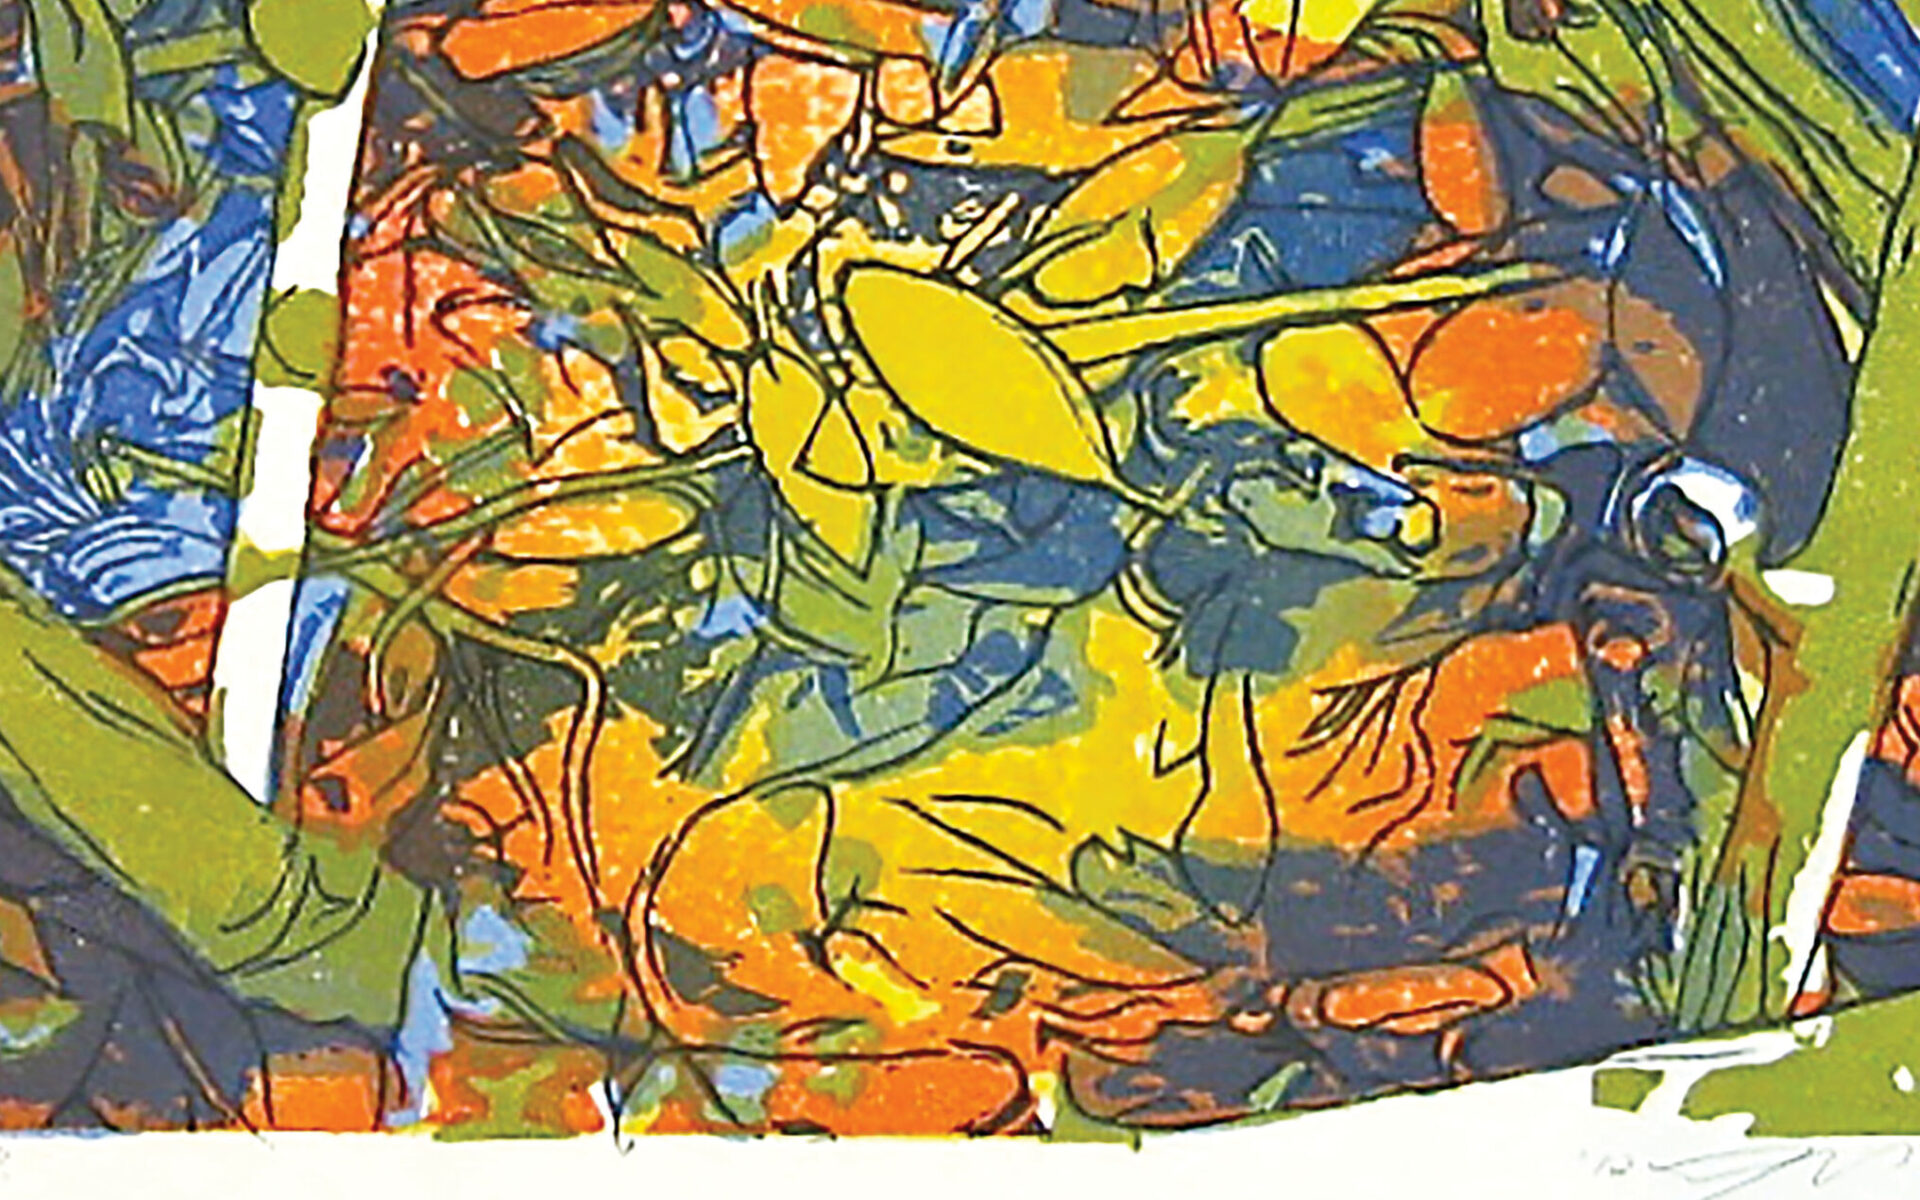 Woodblock print of flowers and leaves with bright colors in shades of green, blue, orange, and yellow that fills the frame.